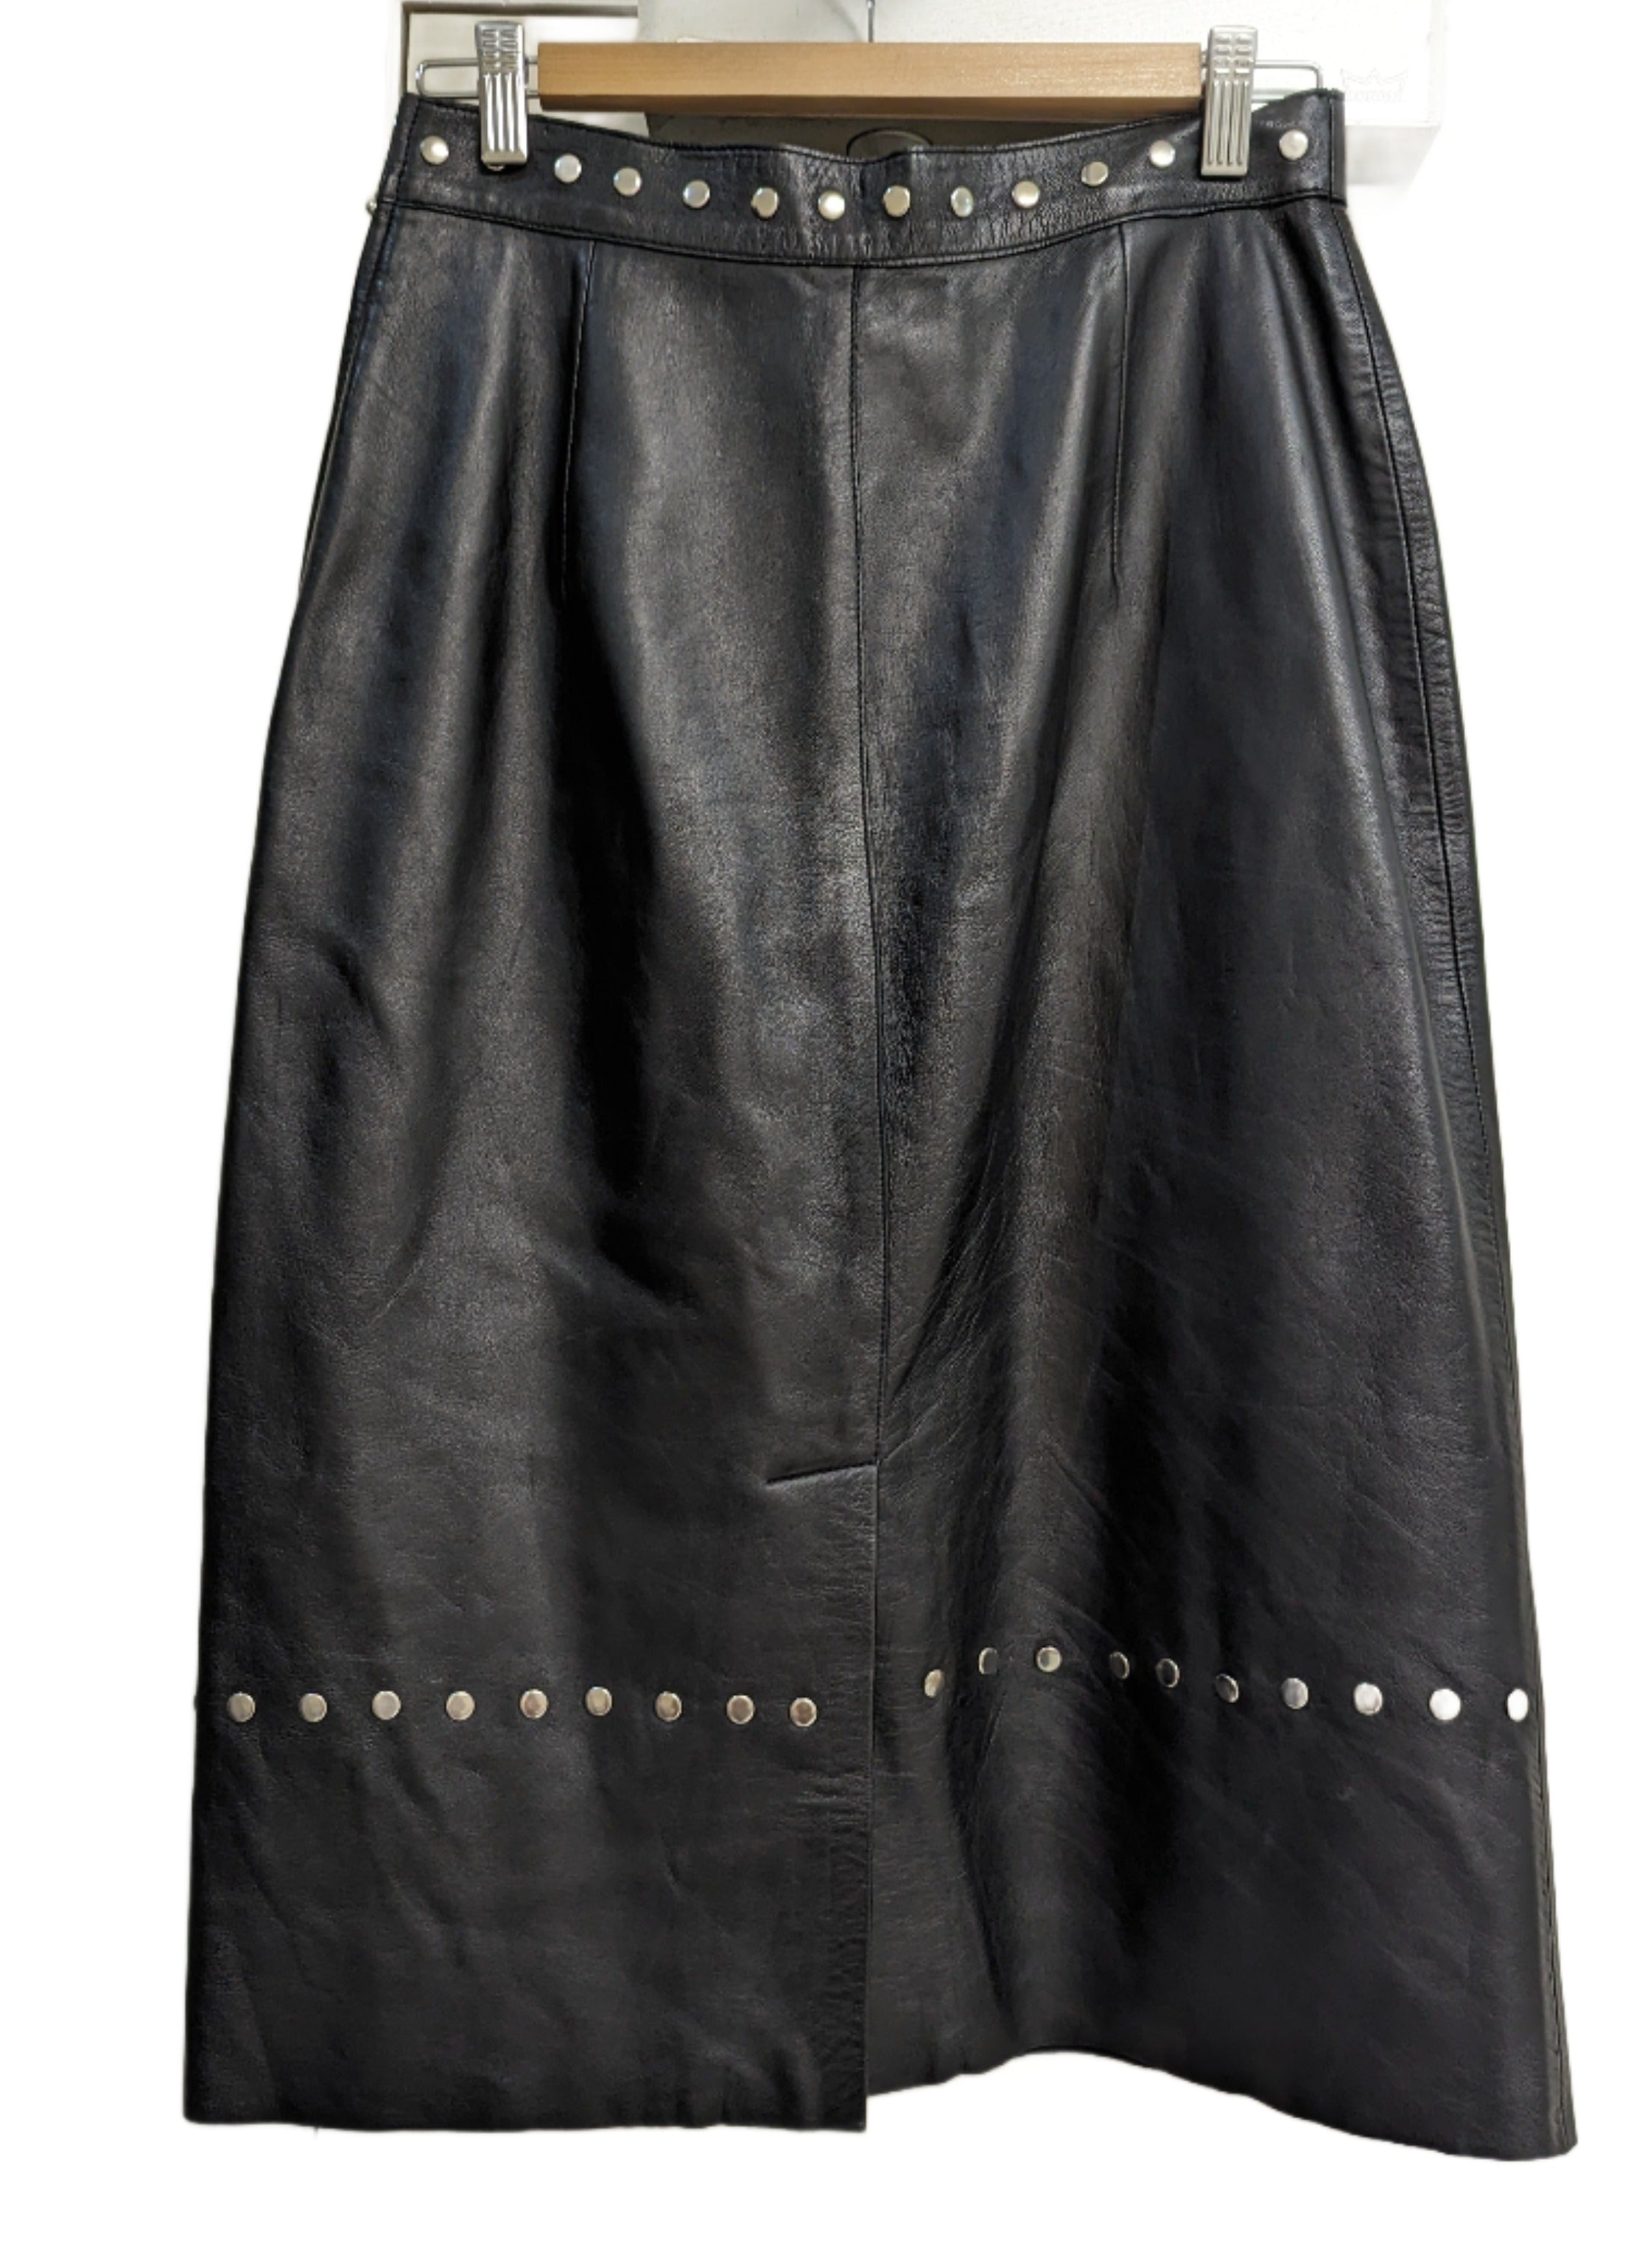 Chung Black Leather Skirt with Studs